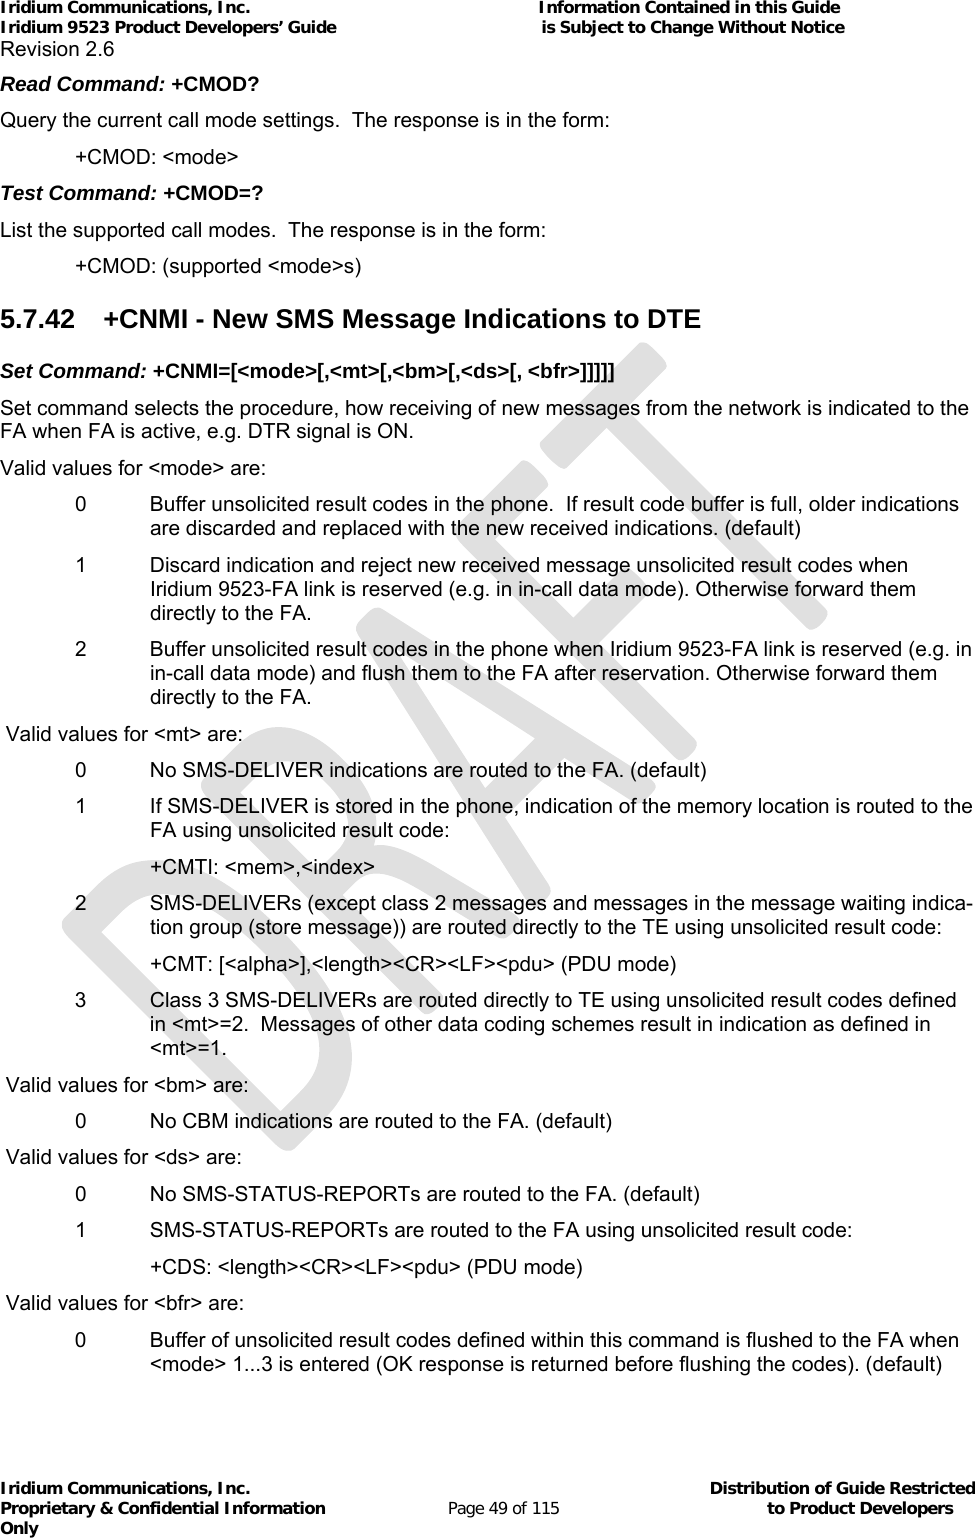 Iridium Communications, Inc.                                                           Information Contained in this Guide  Iridium 9523 Product Developers’ Guide                                          is Subject to Change Without Notice  Revision 2.6 Iridium Communications, Inc.                                          Distribution of Guide Restricted Proprietary &amp; Confidential Information                         Page 49 of 115                                        to Product Developers Only           Read Command: +CMOD? Query the current call mode settings.  The response is in the form:  +CMOD: &lt;mode&gt; Test Command: +CMOD=? List the supported call modes.  The response is in the form:  +CMOD: (supported &lt;mode&gt;s) 5.7.42  +CNMI - New SMS Message Indications to DTE Set Command: +CNMI=[&lt;mode&gt;[,&lt;mt&gt;[,&lt;bm&gt;[,&lt;ds&gt;[, &lt;bfr&gt;]]]]] Set command selects the procedure, how receiving of new messages from the network is indicated to the FA when FA is active, e.g. DTR signal is ON. Valid values for &lt;mode&gt; are: 0   Buffer unsolicited result codes in the phone.  If result code buffer is full, older indications are discarded and replaced with the new received indications. (default) 1   Discard indication and reject new received message unsolicited result codes when Iridium 9523-FA link is reserved (e.g. in in-call data mode). Otherwise forward them directly to the FA.  2   Buffer unsolicited result codes in the phone when Iridium 9523-FA link is reserved (e.g. in in-call data mode) and flush them to the FA after reservation. Otherwise forward them directly to the FA.  Valid values for &lt;mt&gt; are:    0   No SMS-DELIVER indications are routed to the FA. (default) 1  If SMS-DELIVER is stored in the phone, indication of the memory location is routed to the FA using unsolicited result code:    +CMTI: &lt;mem&gt;,&lt;index&gt;  2   SMS-DELIVERs (except class 2 messages and messages in the message waiting indica-tion group (store message)) are routed directly to the TE using unsolicited result code:   +CMT: [&lt;alpha&gt;],&lt;length&gt;&lt;CR&gt;&lt;LF&gt;&lt;pdu&gt; (PDU mode)  3   Class 3 SMS-DELIVERs are routed directly to TE using unsolicited result codes defined in &lt;mt&gt;=2.  Messages of other data coding schemes result in indication as defined in &lt;mt&gt;=1.  Valid values for &lt;bm&gt; are:    0   No CBM indications are routed to the FA. (default)  Valid values for &lt;ds&gt; are:    0   No SMS-STATUS-REPORTs are routed to the FA. (default)   1   SMS-STATUS-REPORTs are routed to the FA using unsolicited result code:      +CDS: &lt;length&gt;&lt;CR&gt;&lt;LF&gt;&lt;pdu&gt; (PDU mode)  Valid values for &lt;bfr&gt; are:  0   Buffer of unsolicited result codes defined within this command is flushed to the FA when &lt;mode&gt; 1...3 is entered (OK response is returned before flushing the codes). (default) 